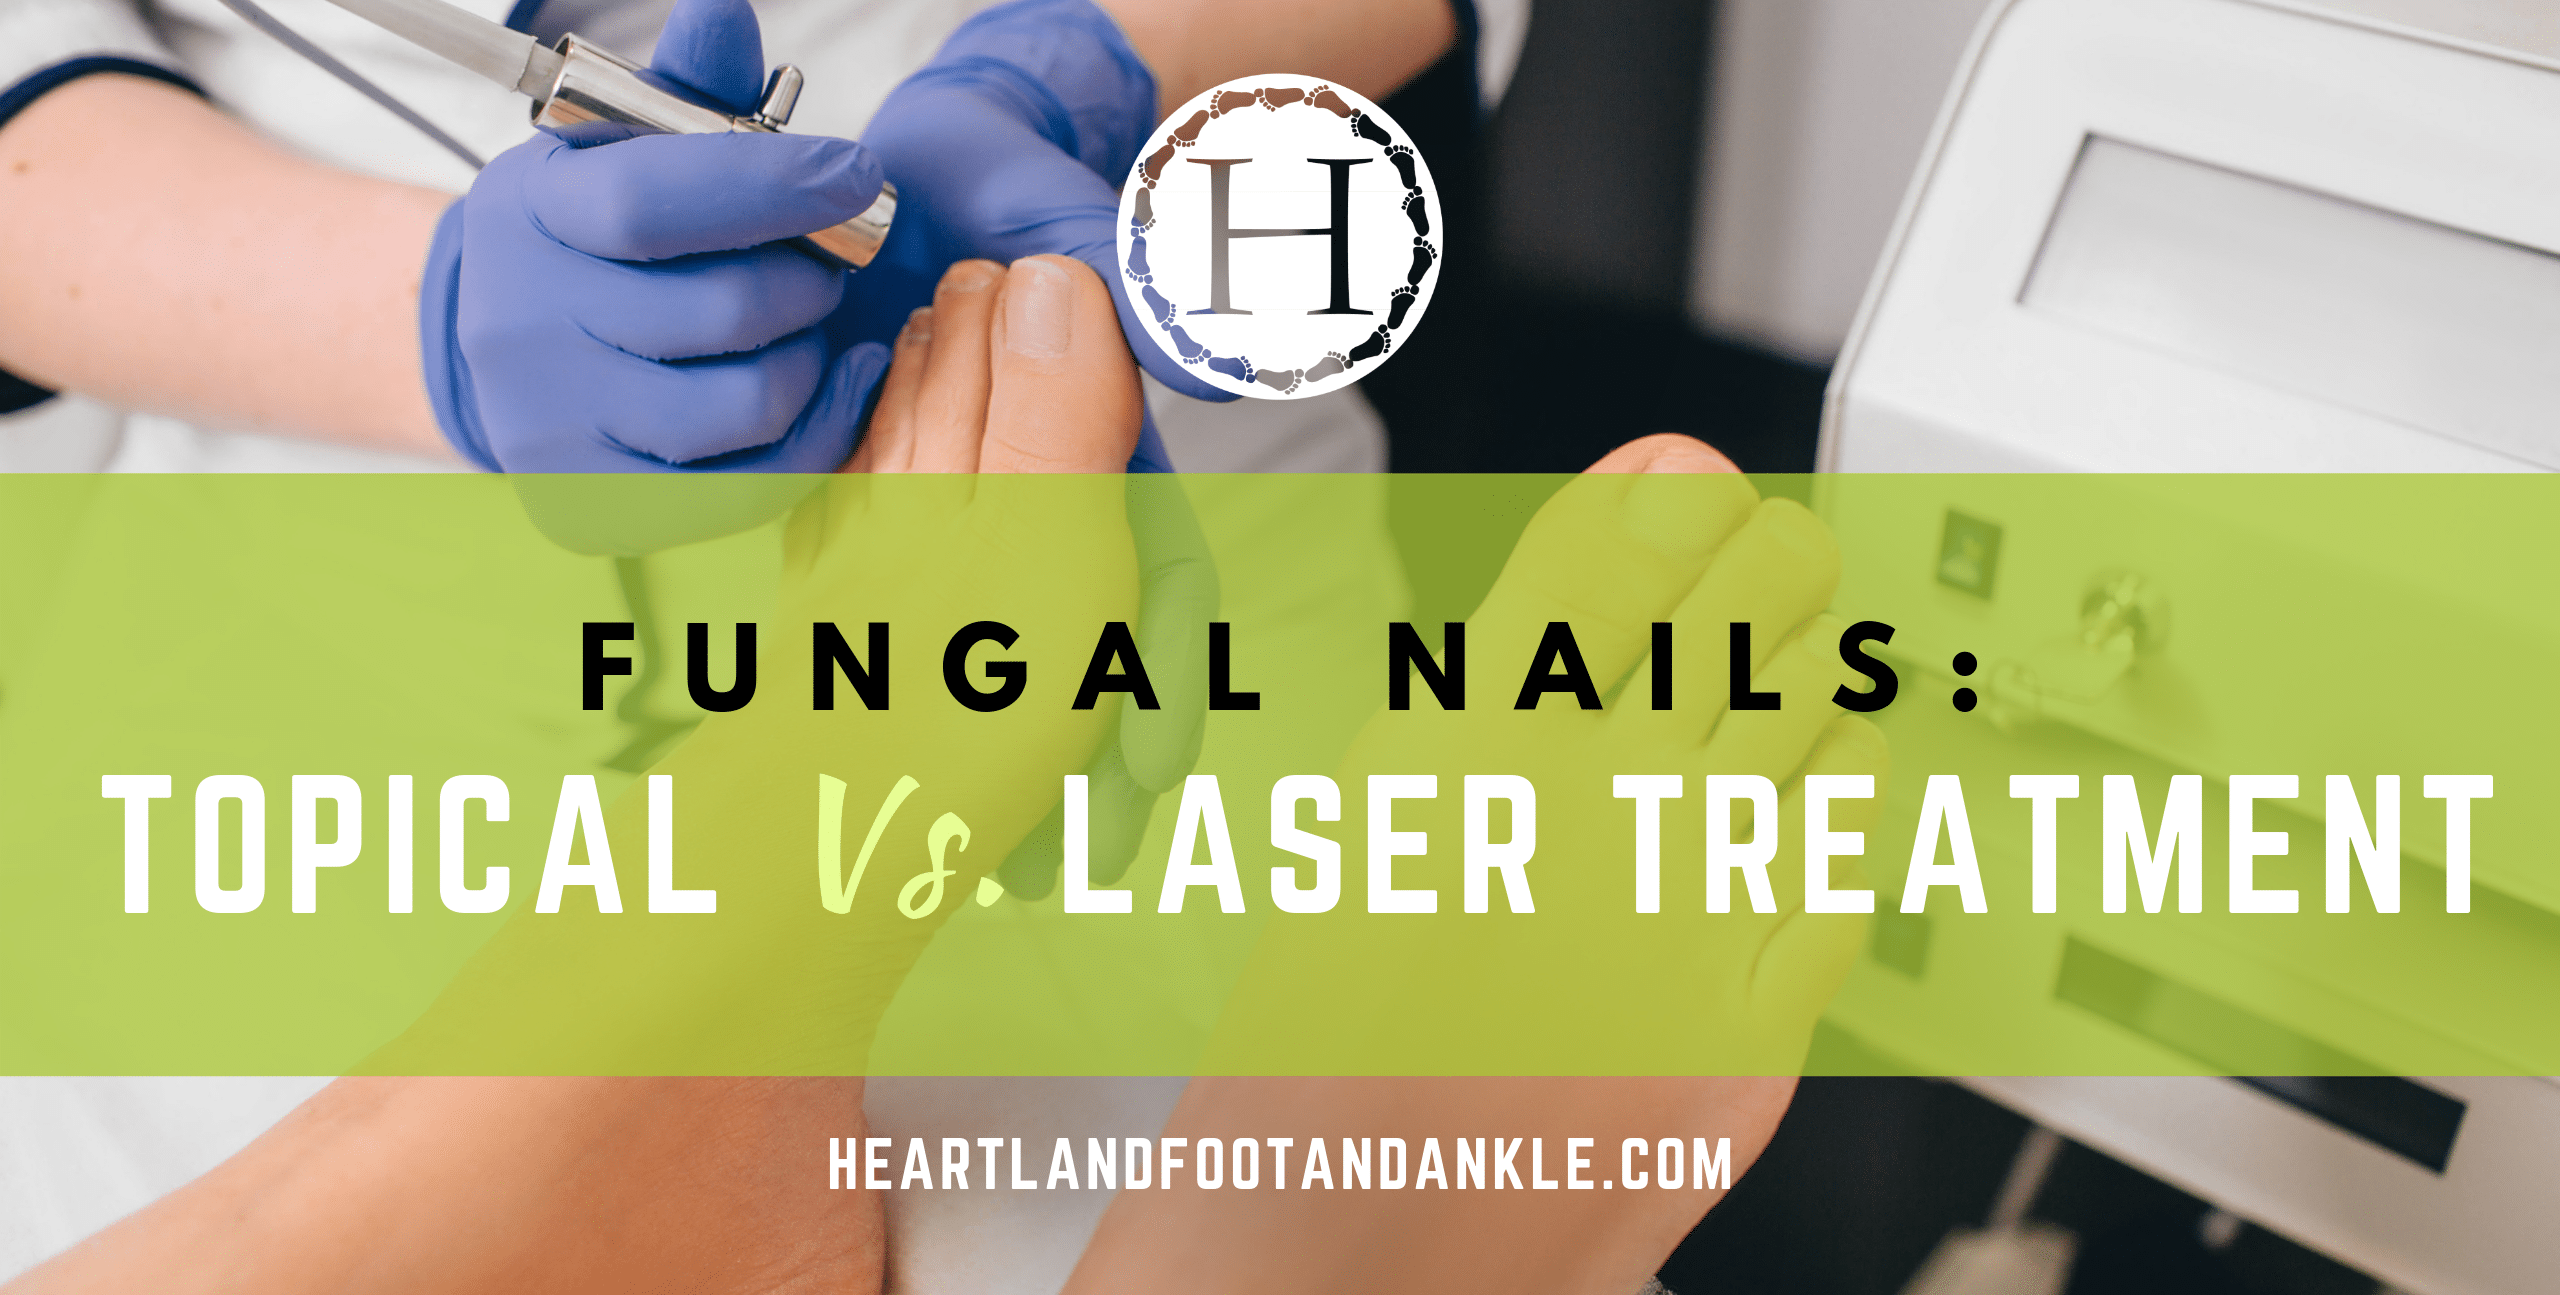 Topical vs. Laser Treatment